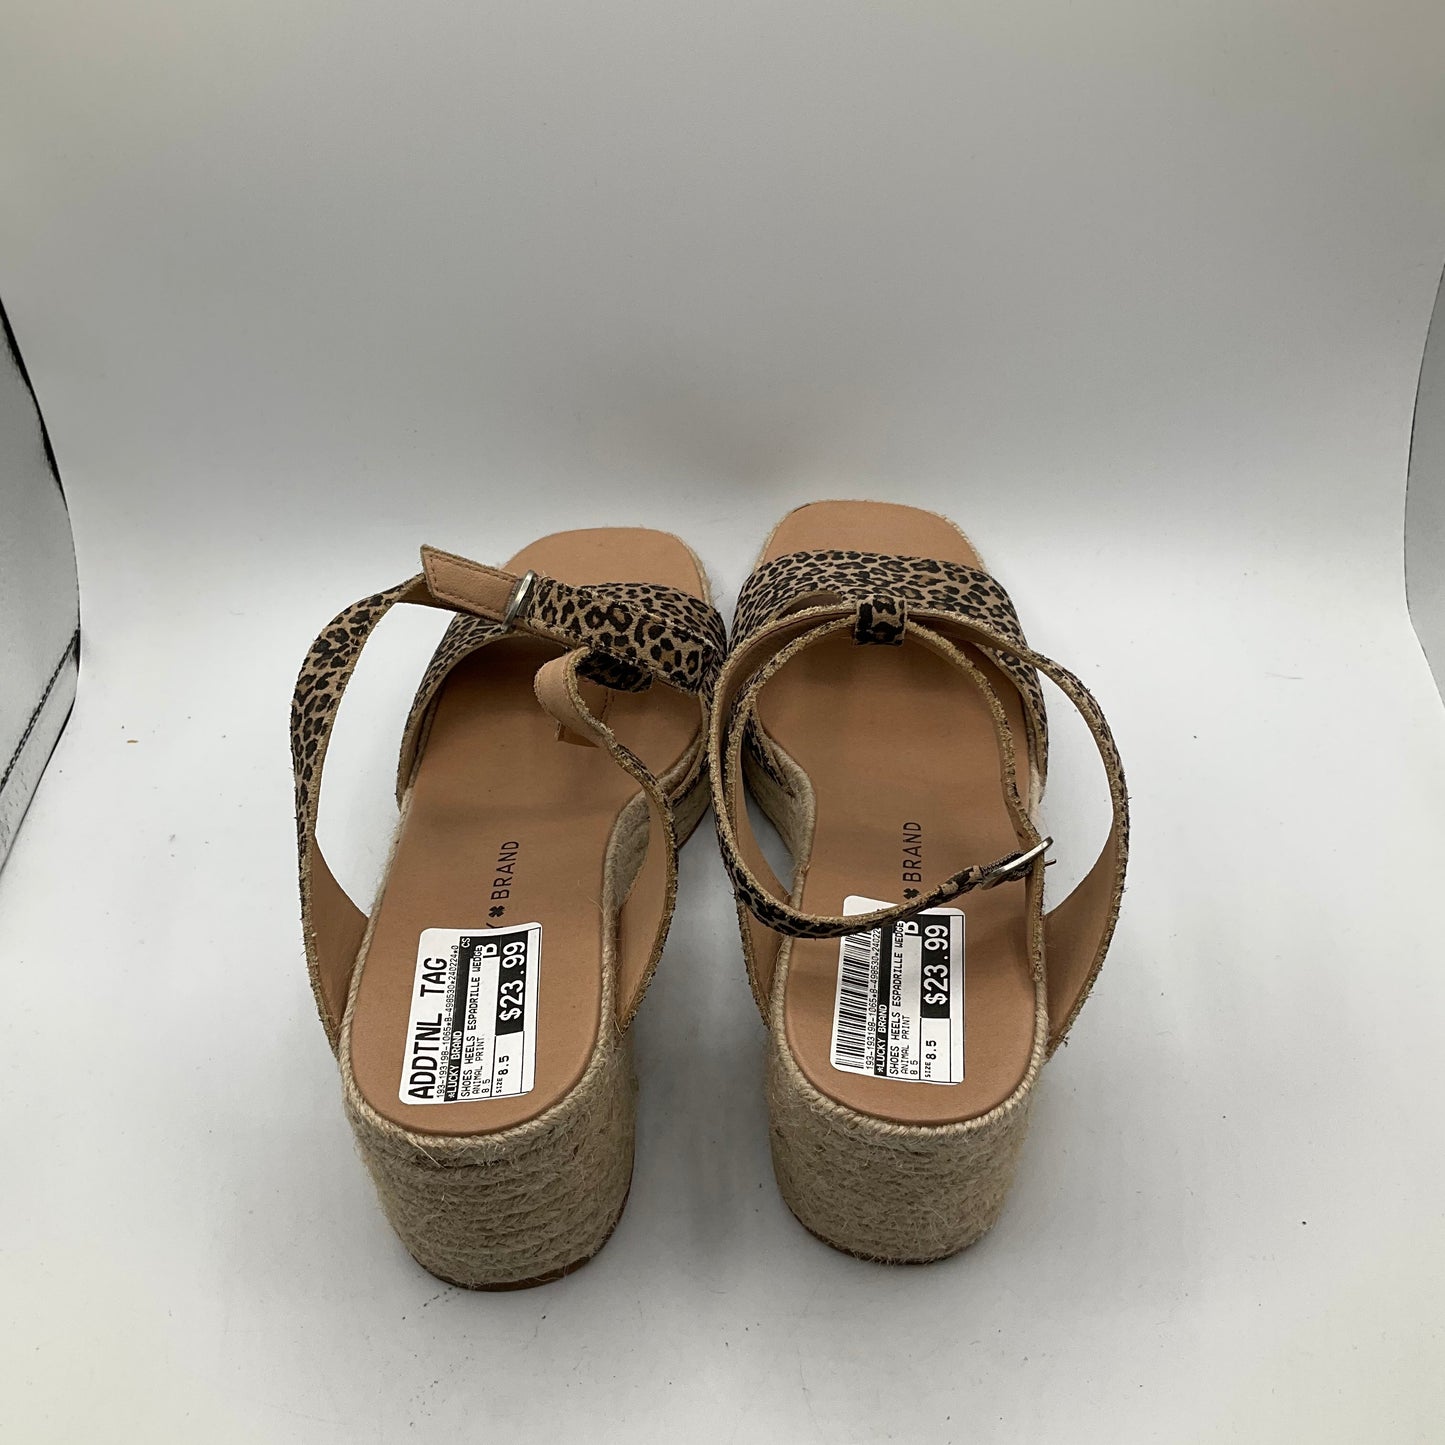 Shoes Heels Espadrille Wedge By Lucky Brand  Size: 8.5